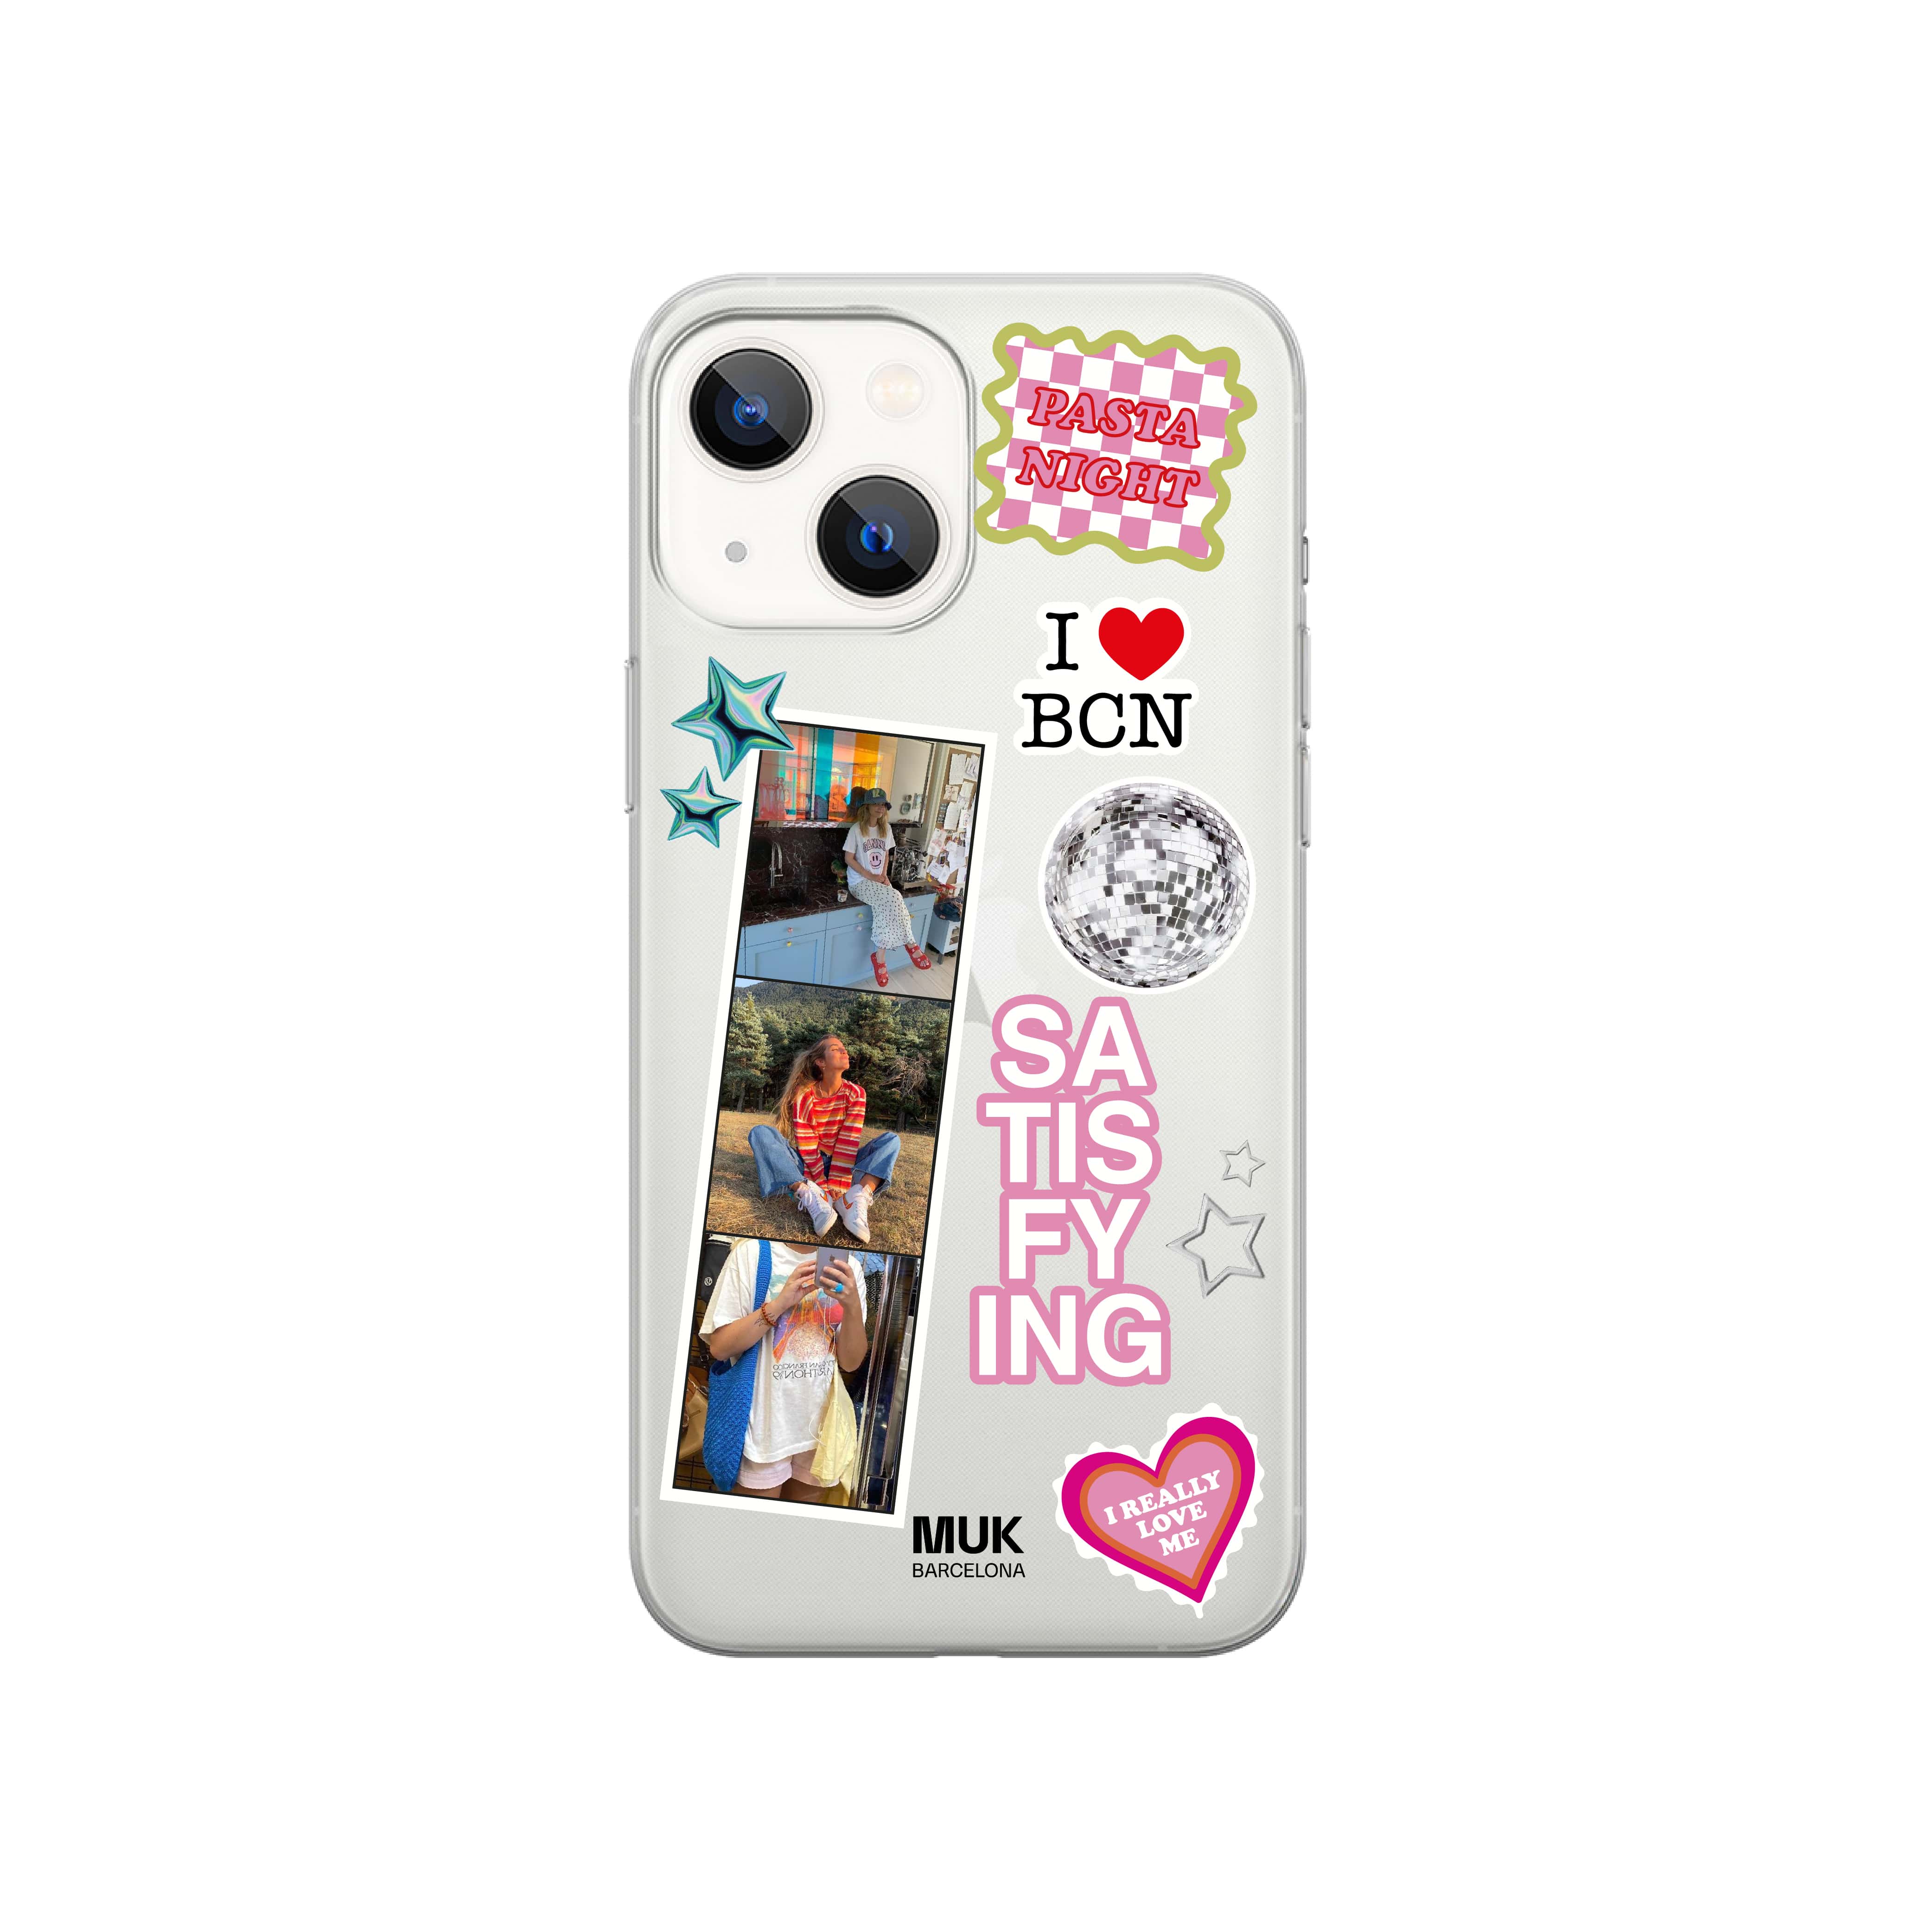 Clear aesthetic stickers phone case with 3 personalized photos.
